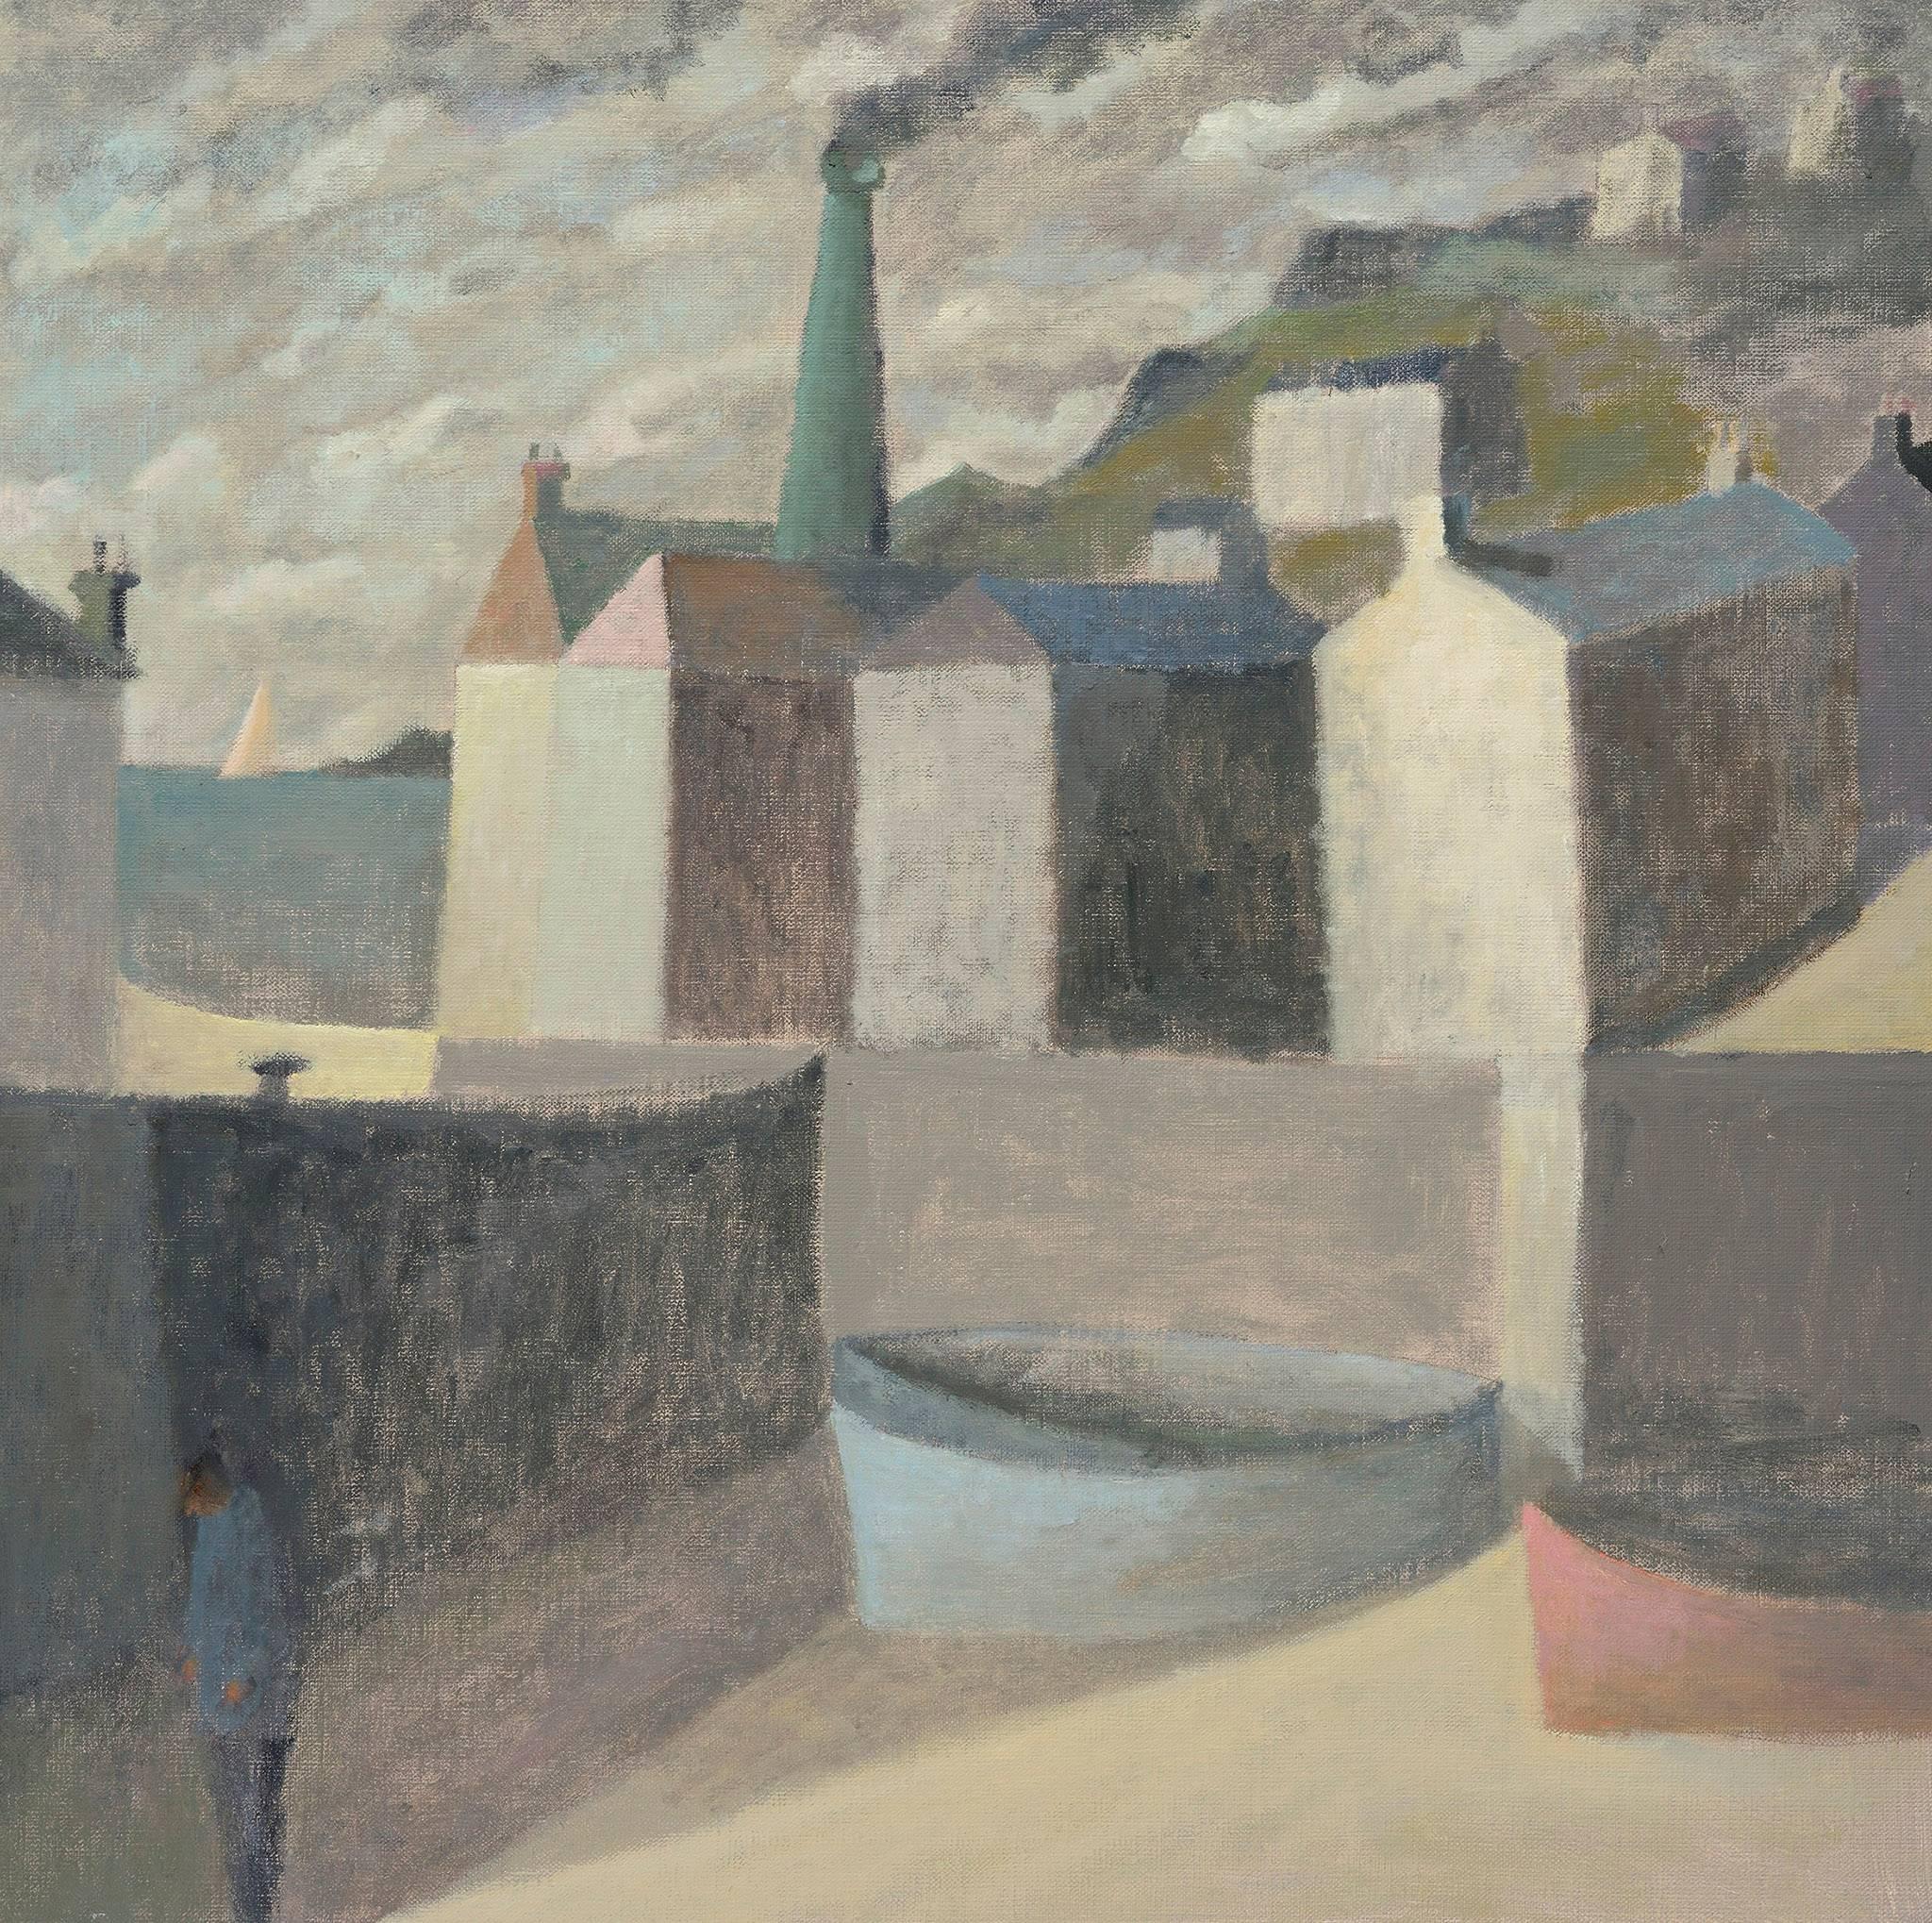 Nicholas Turner Landscape Painting - Harbour with Chimney and Figure